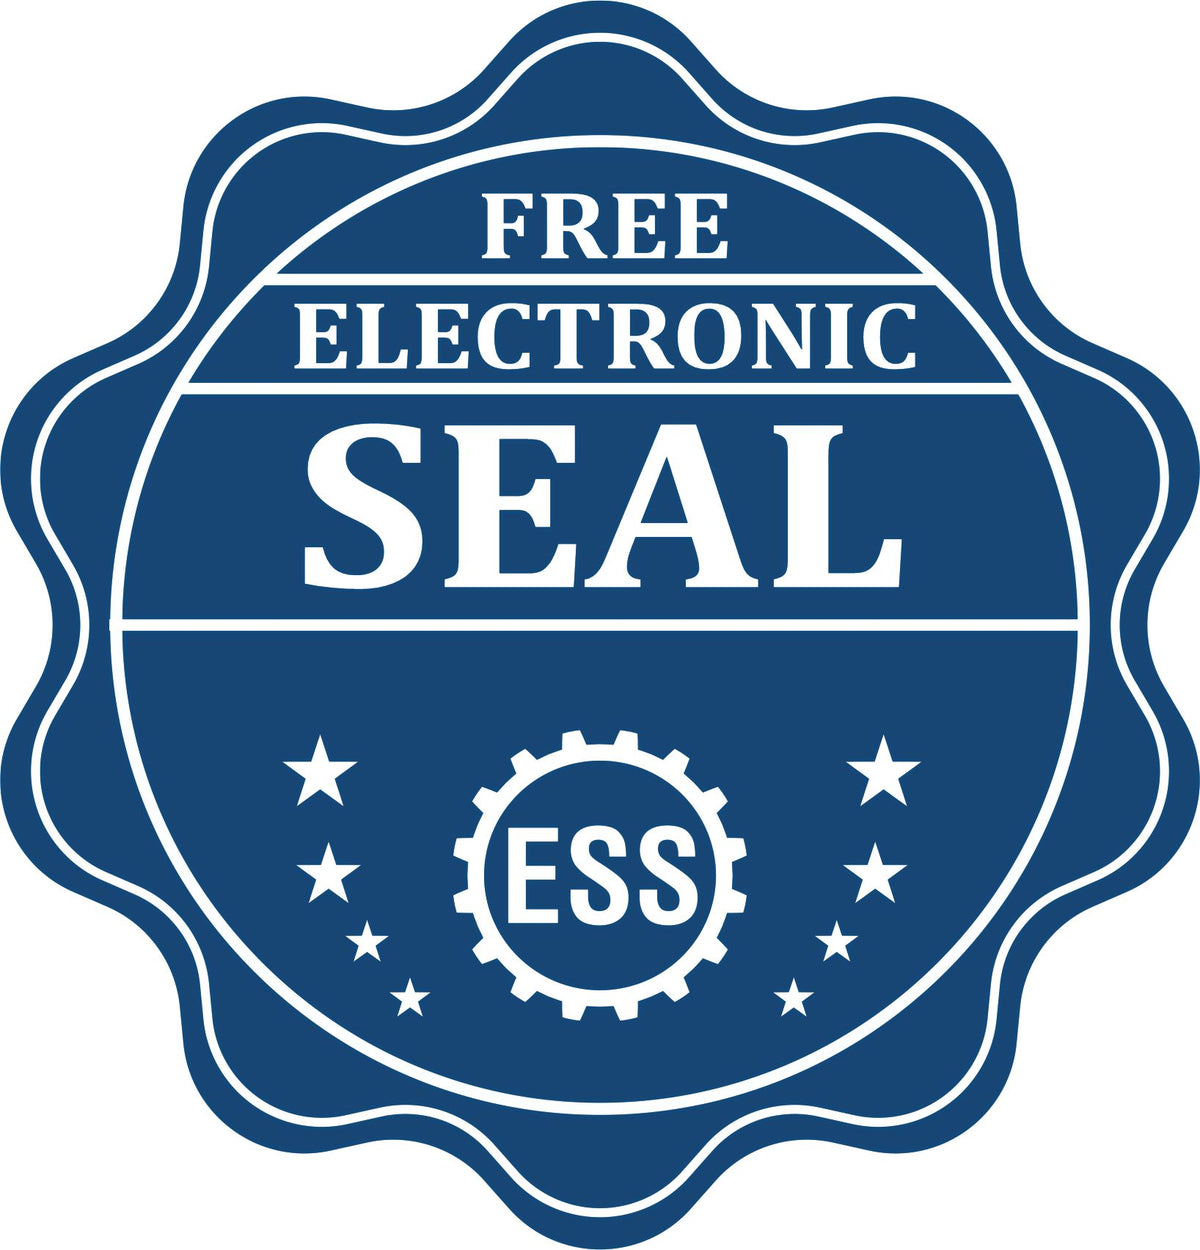 A badge showing a free electronic seal for the Long Reach Tennessee Geology Seal with stars and the ESS gear on the emblem.